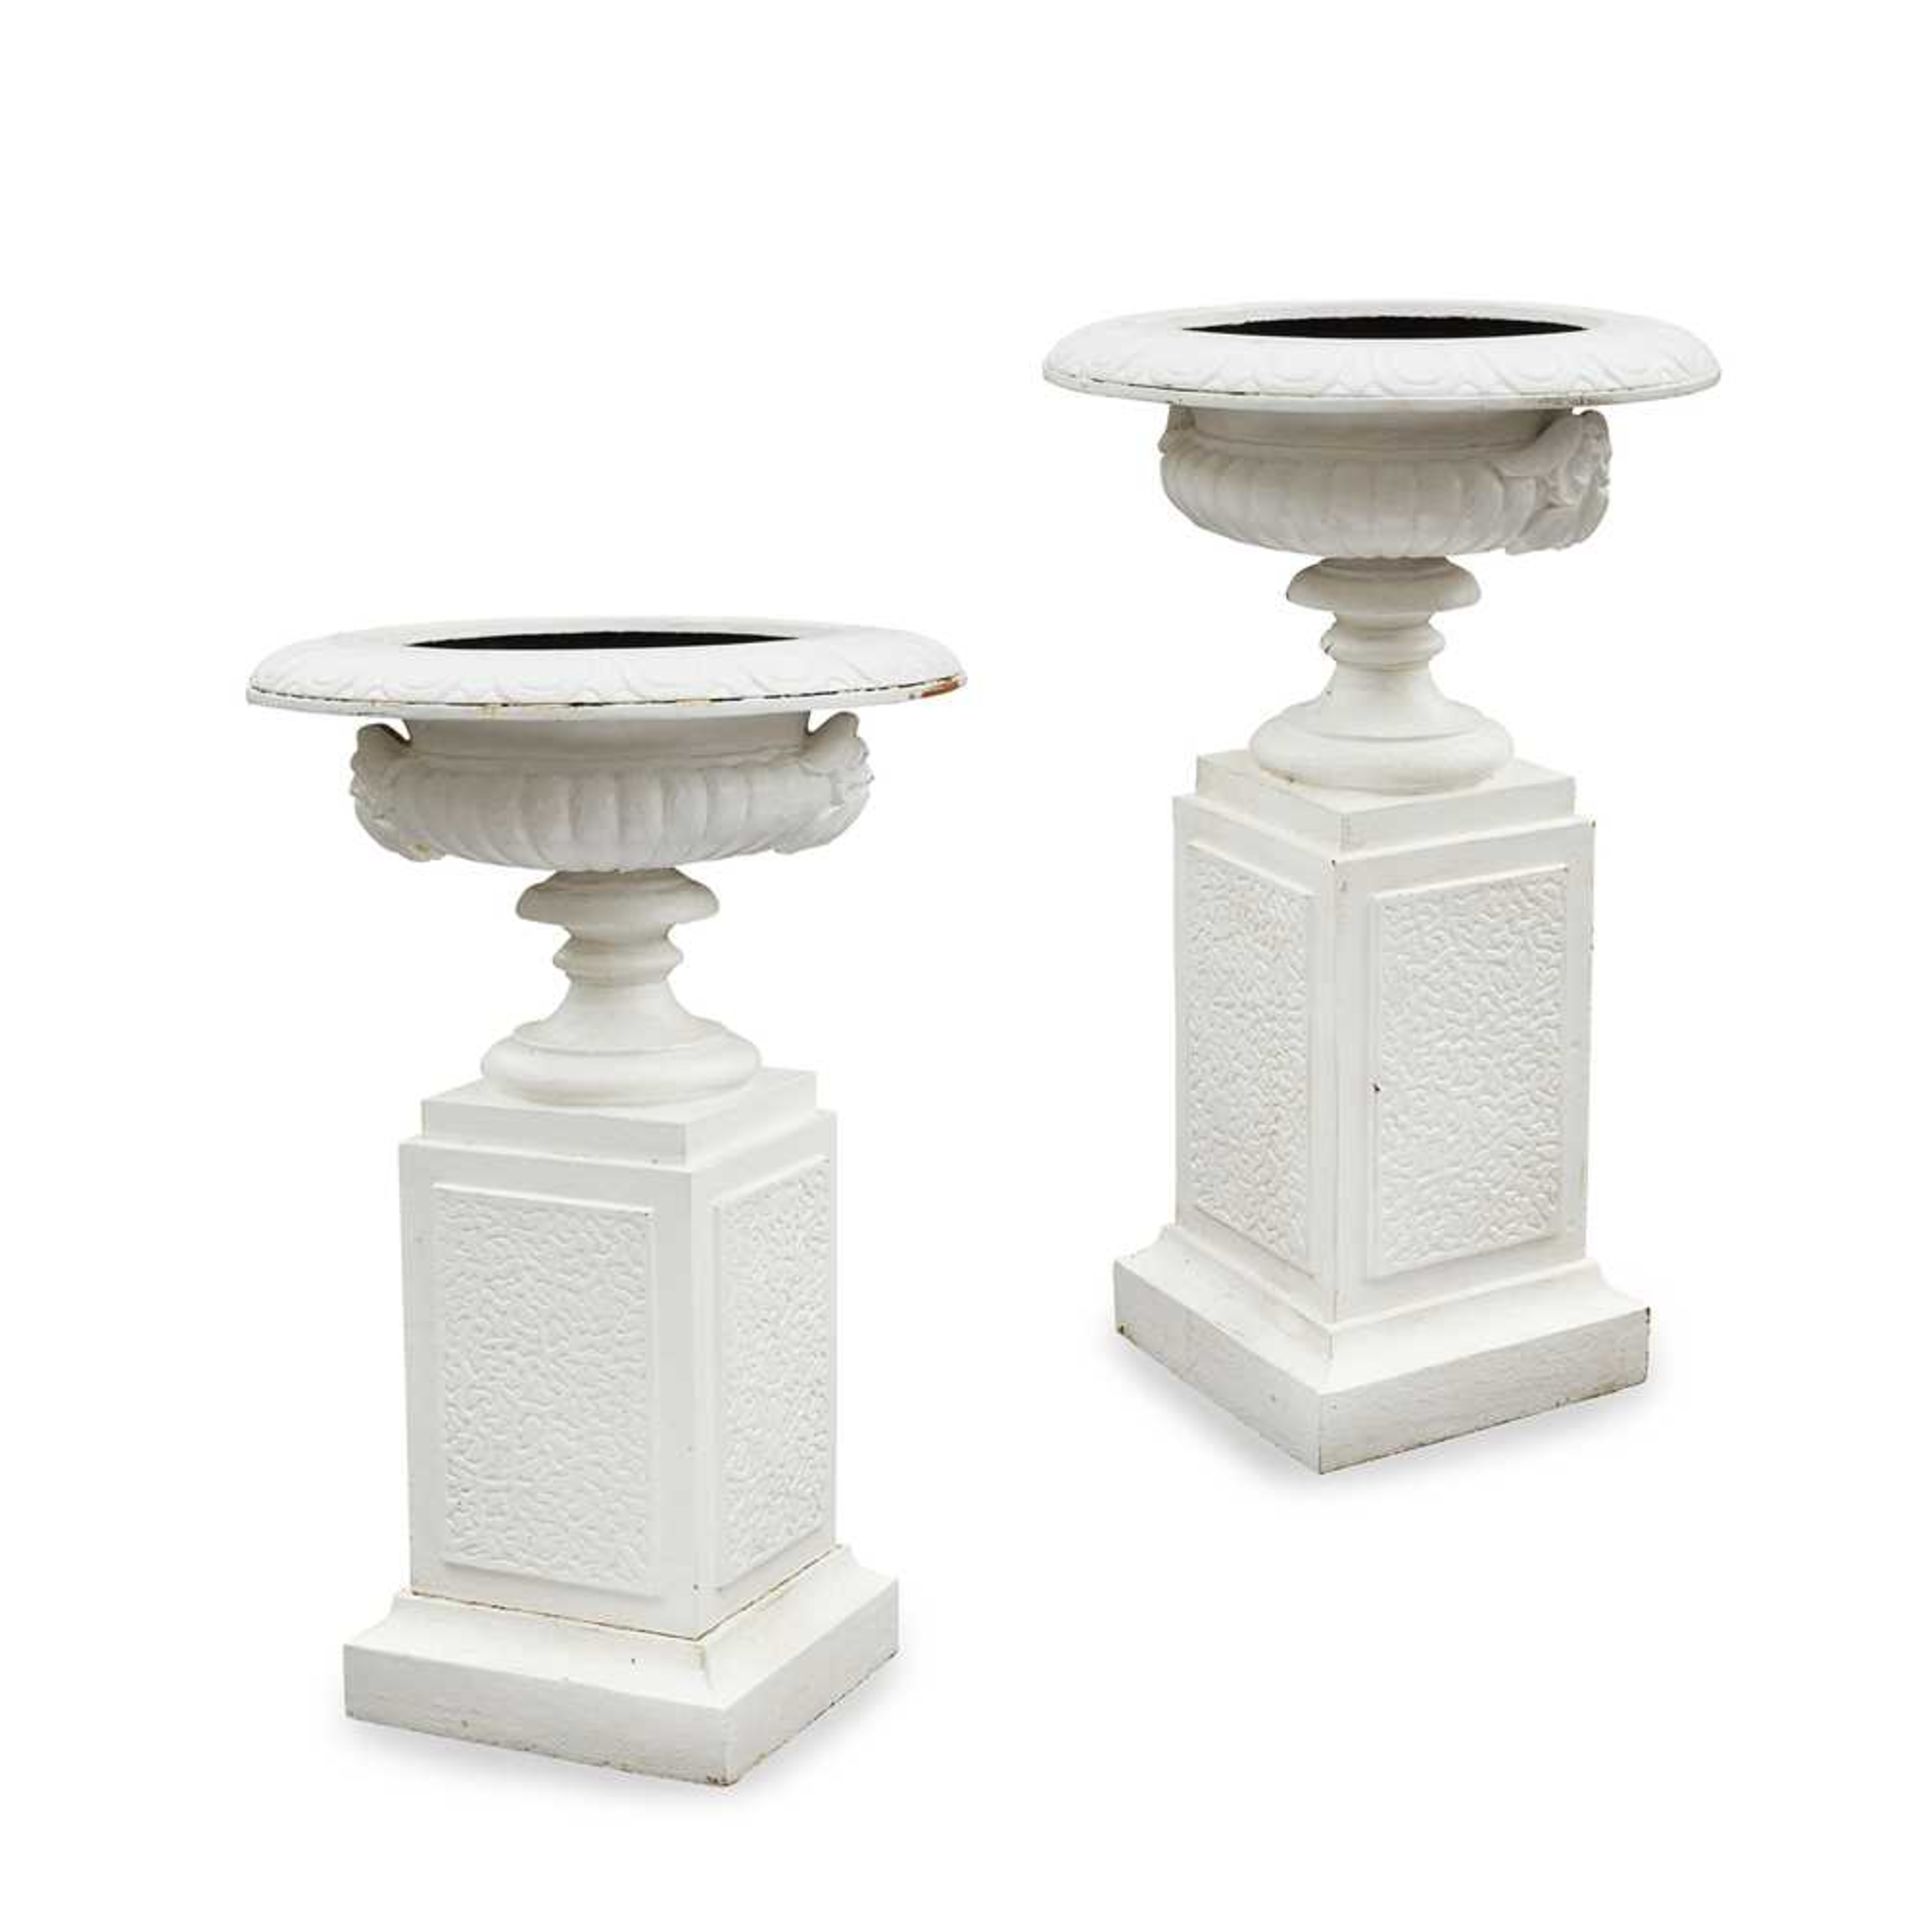 PAIR OF VICTORIAN PAINTED CAST IRON URNS AND PEDESTALS LATE 19TH CENTURY